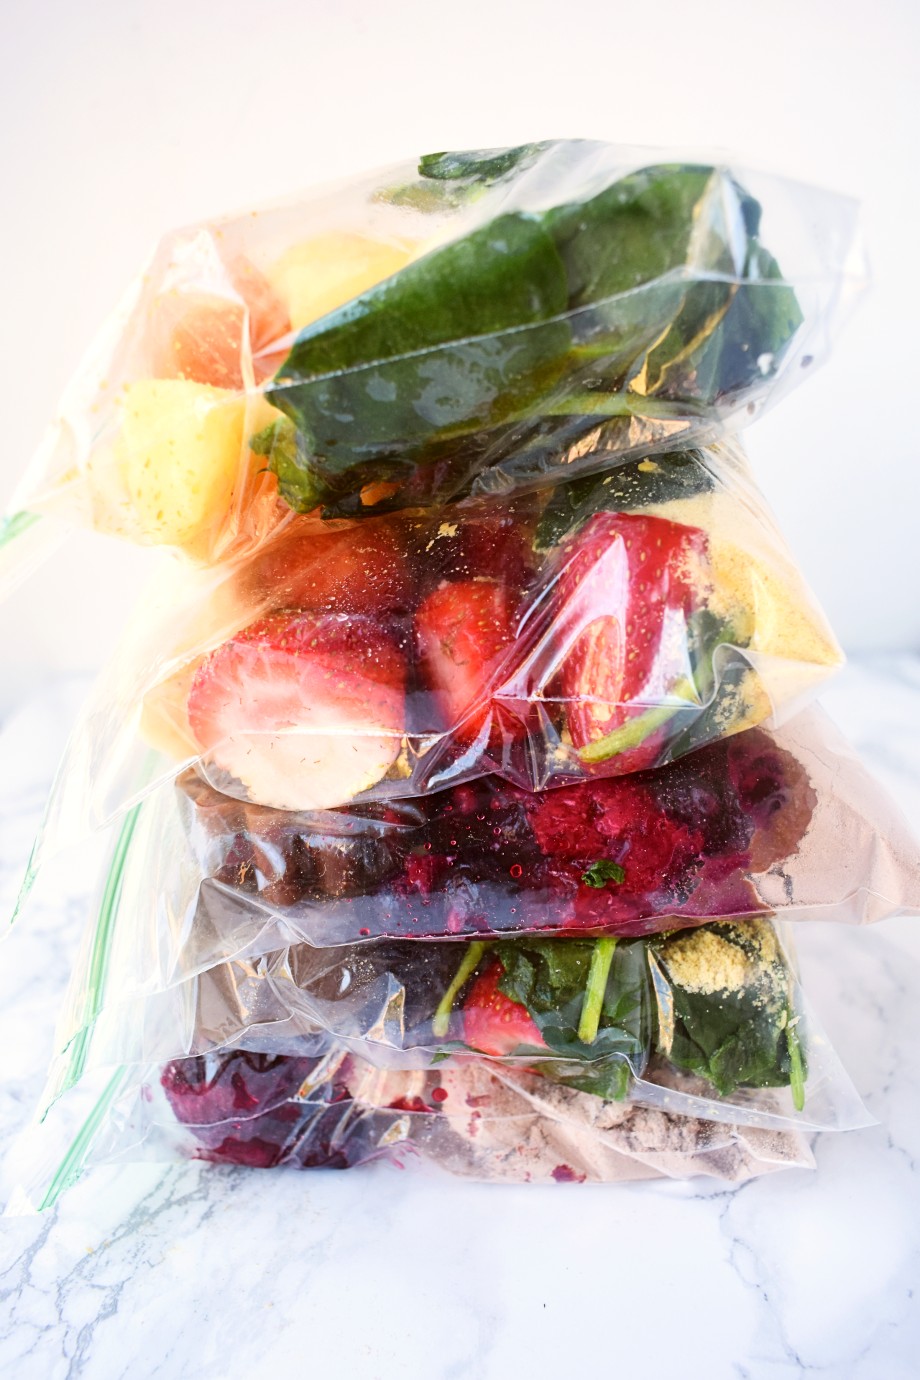 Frozen Smoothie Packs  Make Ahead for Busy Mornings - Shelf Cooking